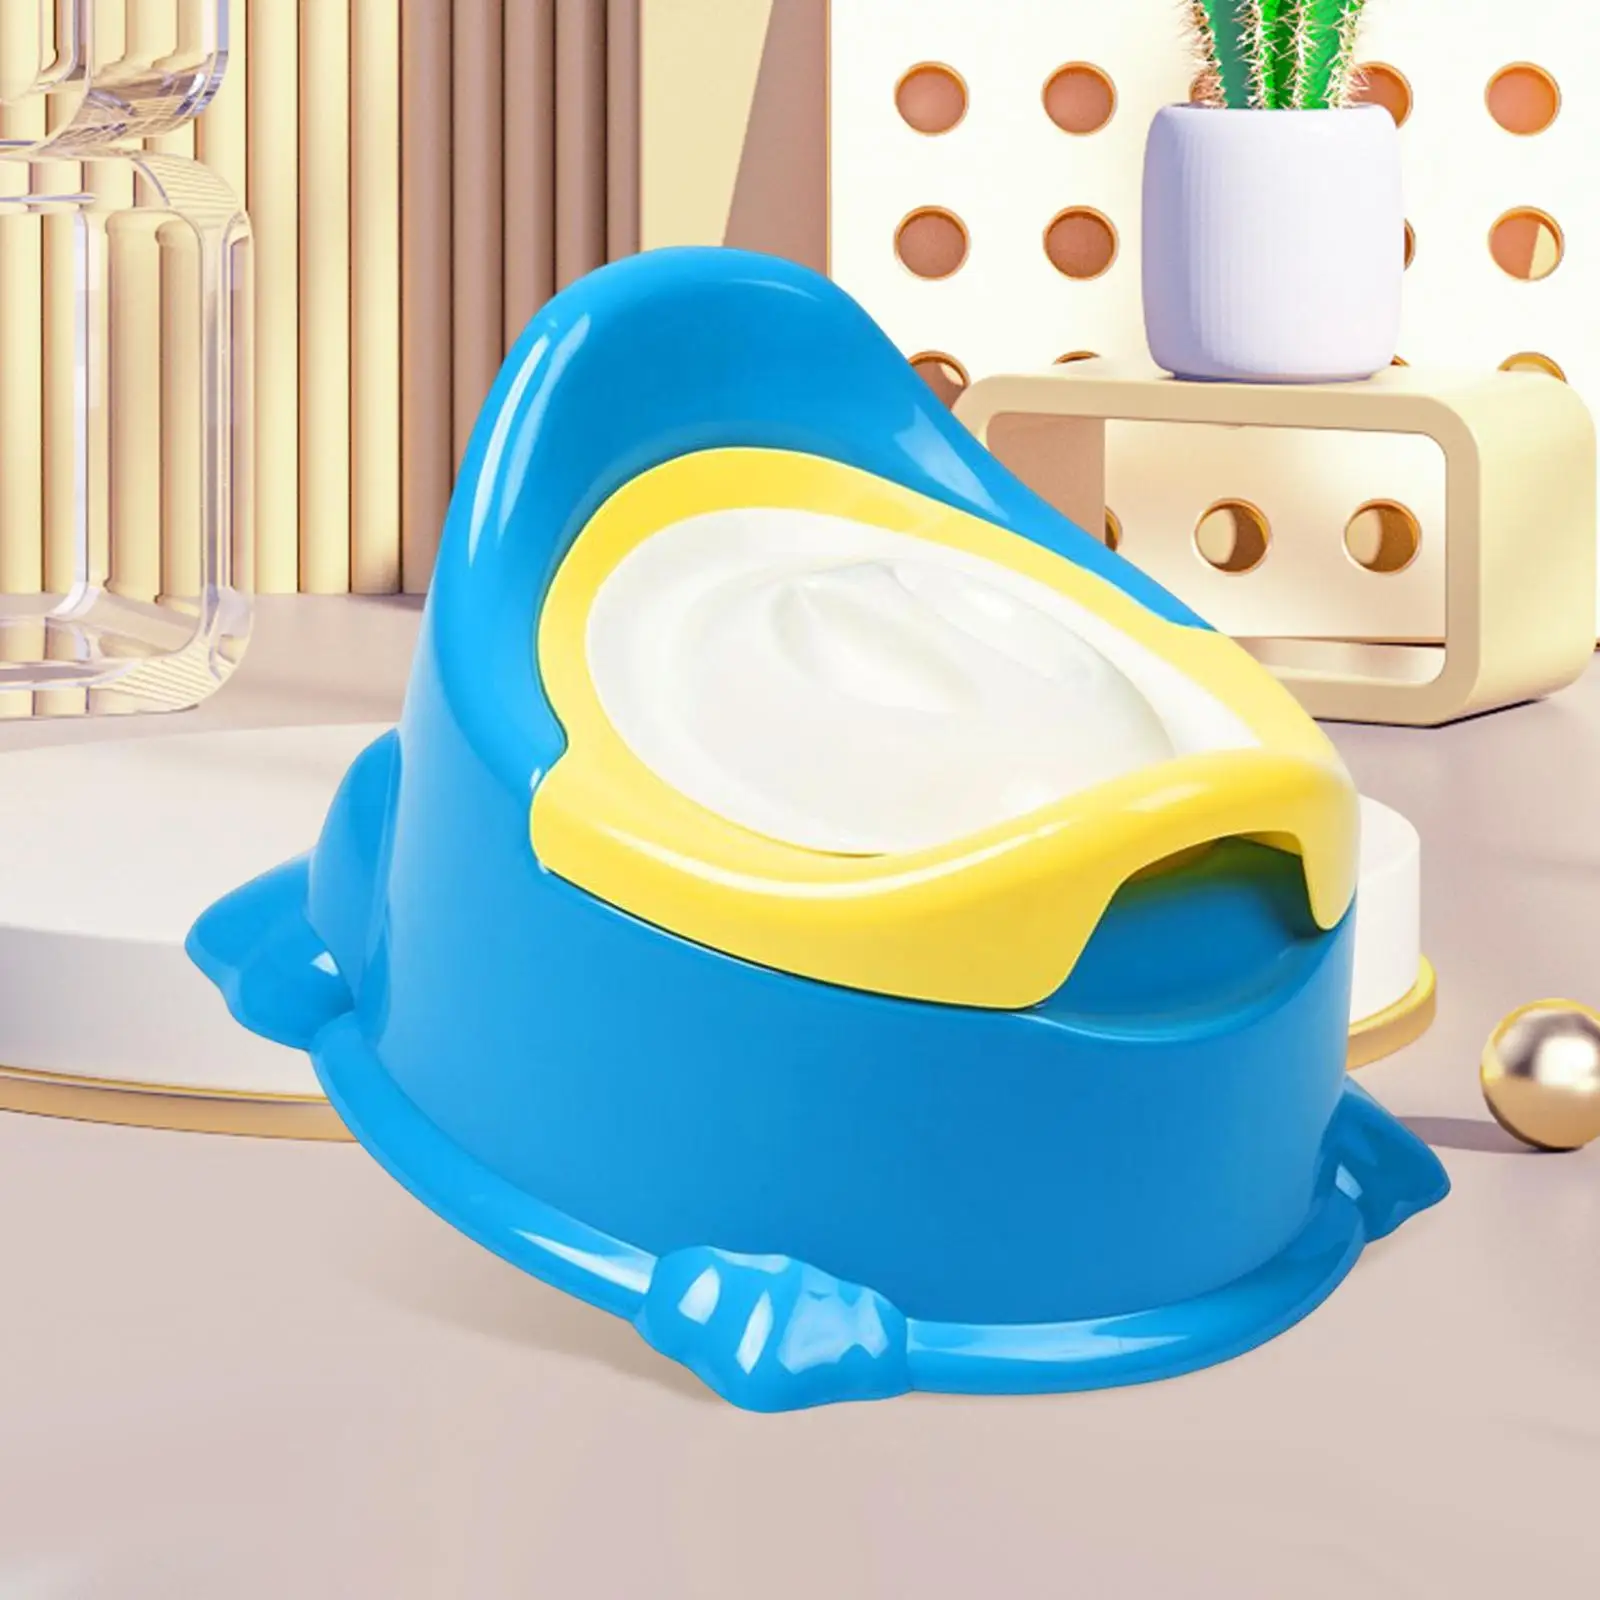 Childrens Potty Toilet Training Seat Easy Clean for Babies 6-12 Month Kids